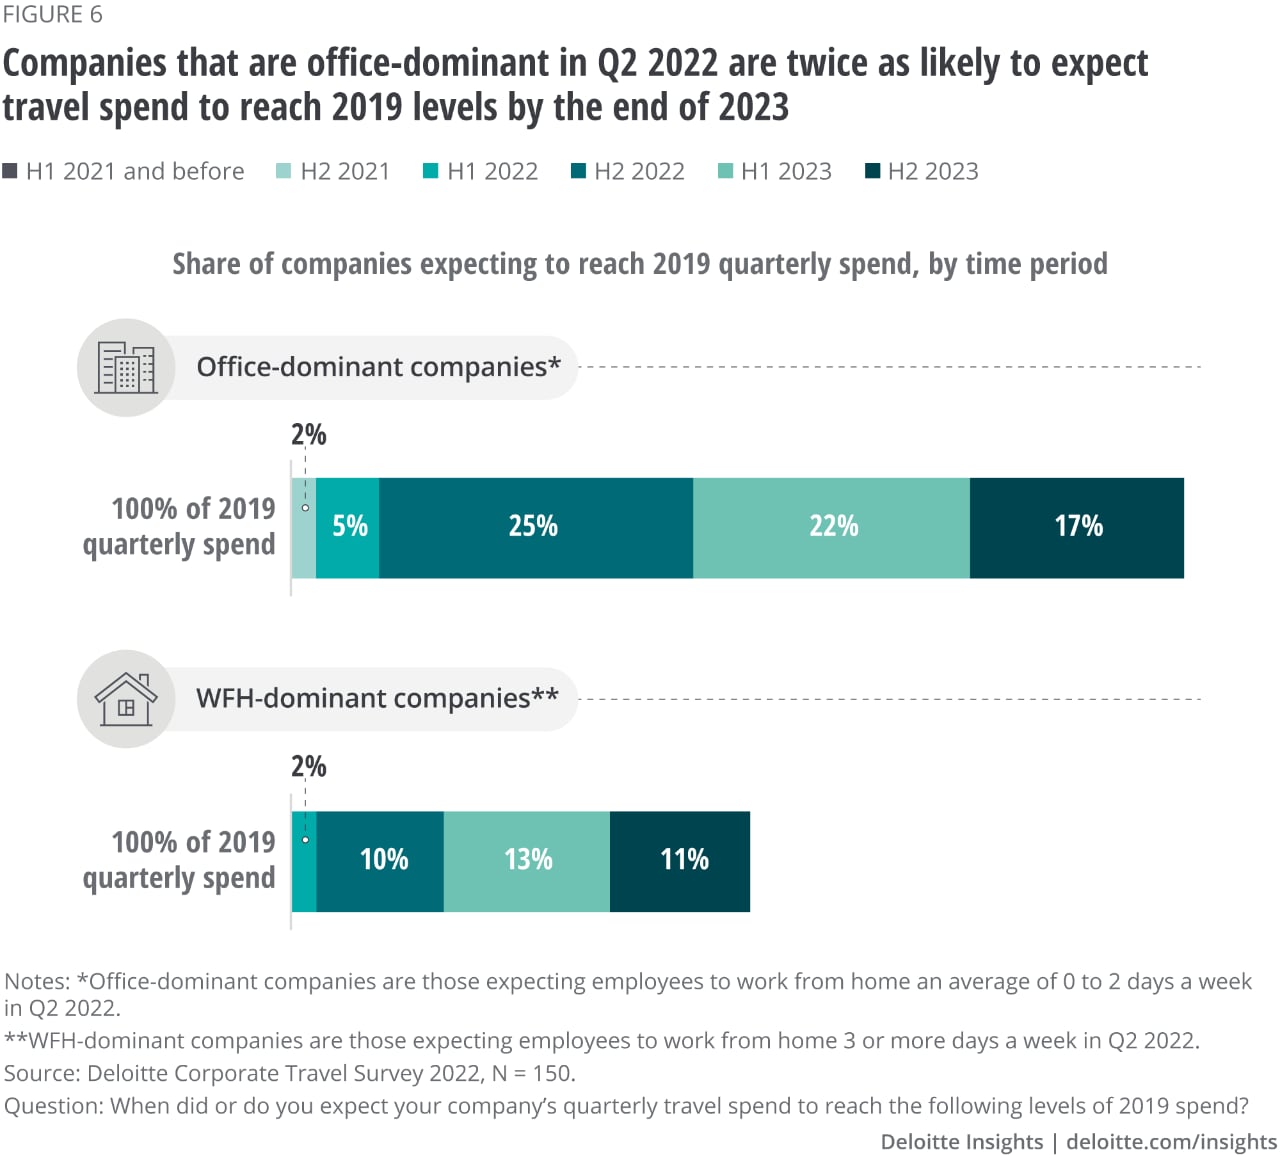 Figure 6. Companies that are work-from-office dominant in Q2 2022 are twice as likely to expect travel spend to reach 2019 levels by the end of 2023.